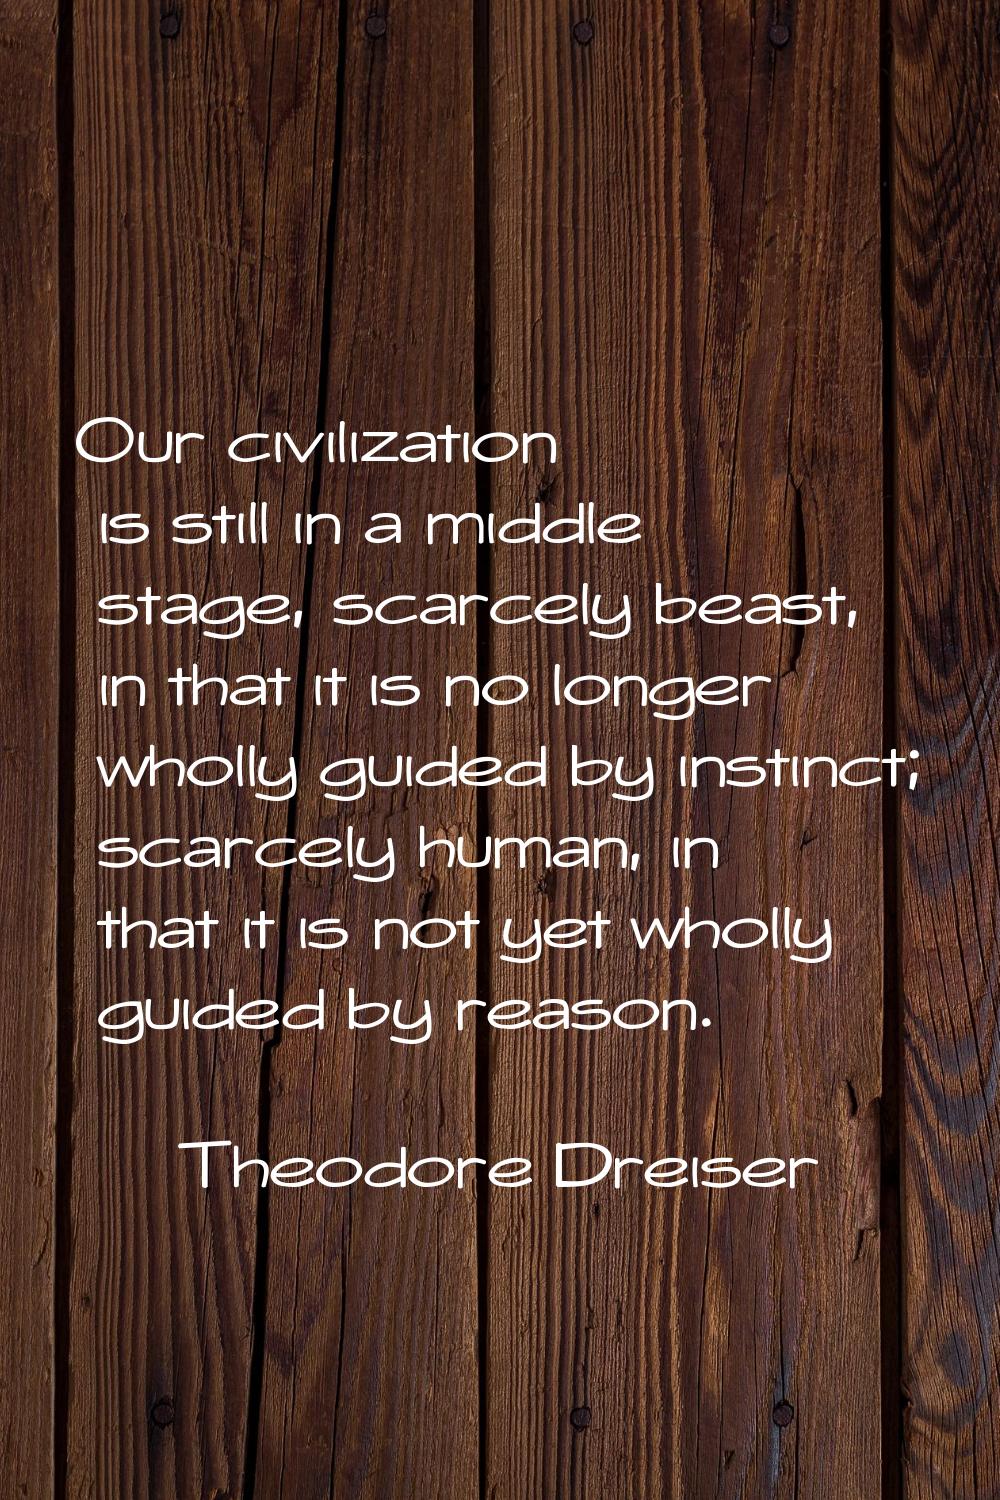 Our civilization is still in a middle stage, scarcely beast, in that it is no longer wholly guided 